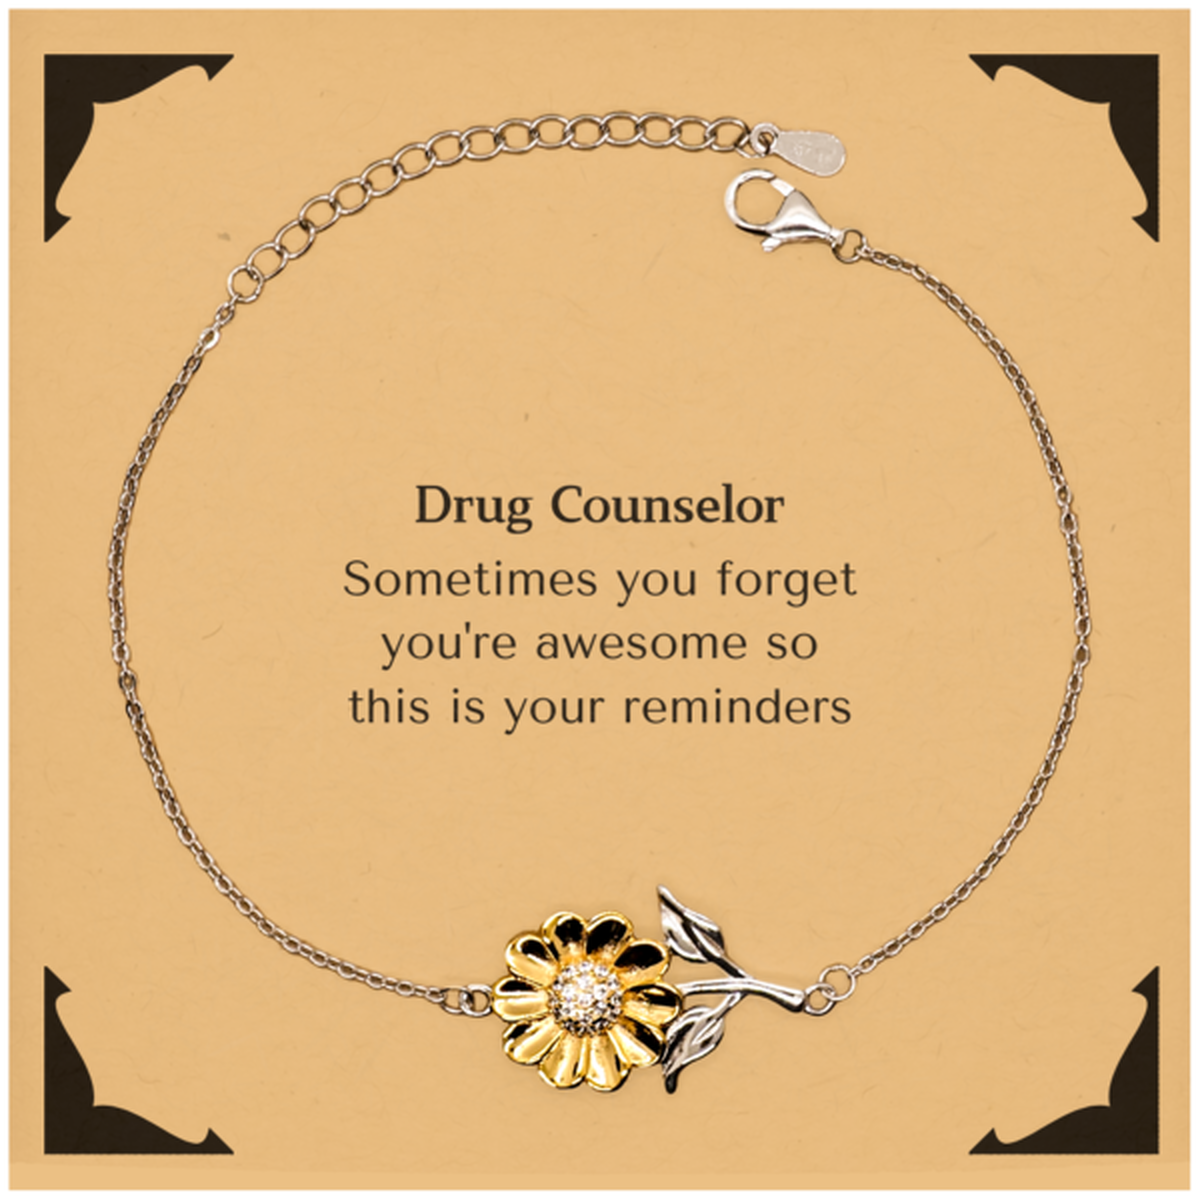 Sentimental Drug Counselor Sunflower Bracelet, Drug Counselor Sometimes you forget you're awesome so this is your reminders, Graduation Christmas Birthday Gifts for Drug Counselor, Men, Women, Coworkers